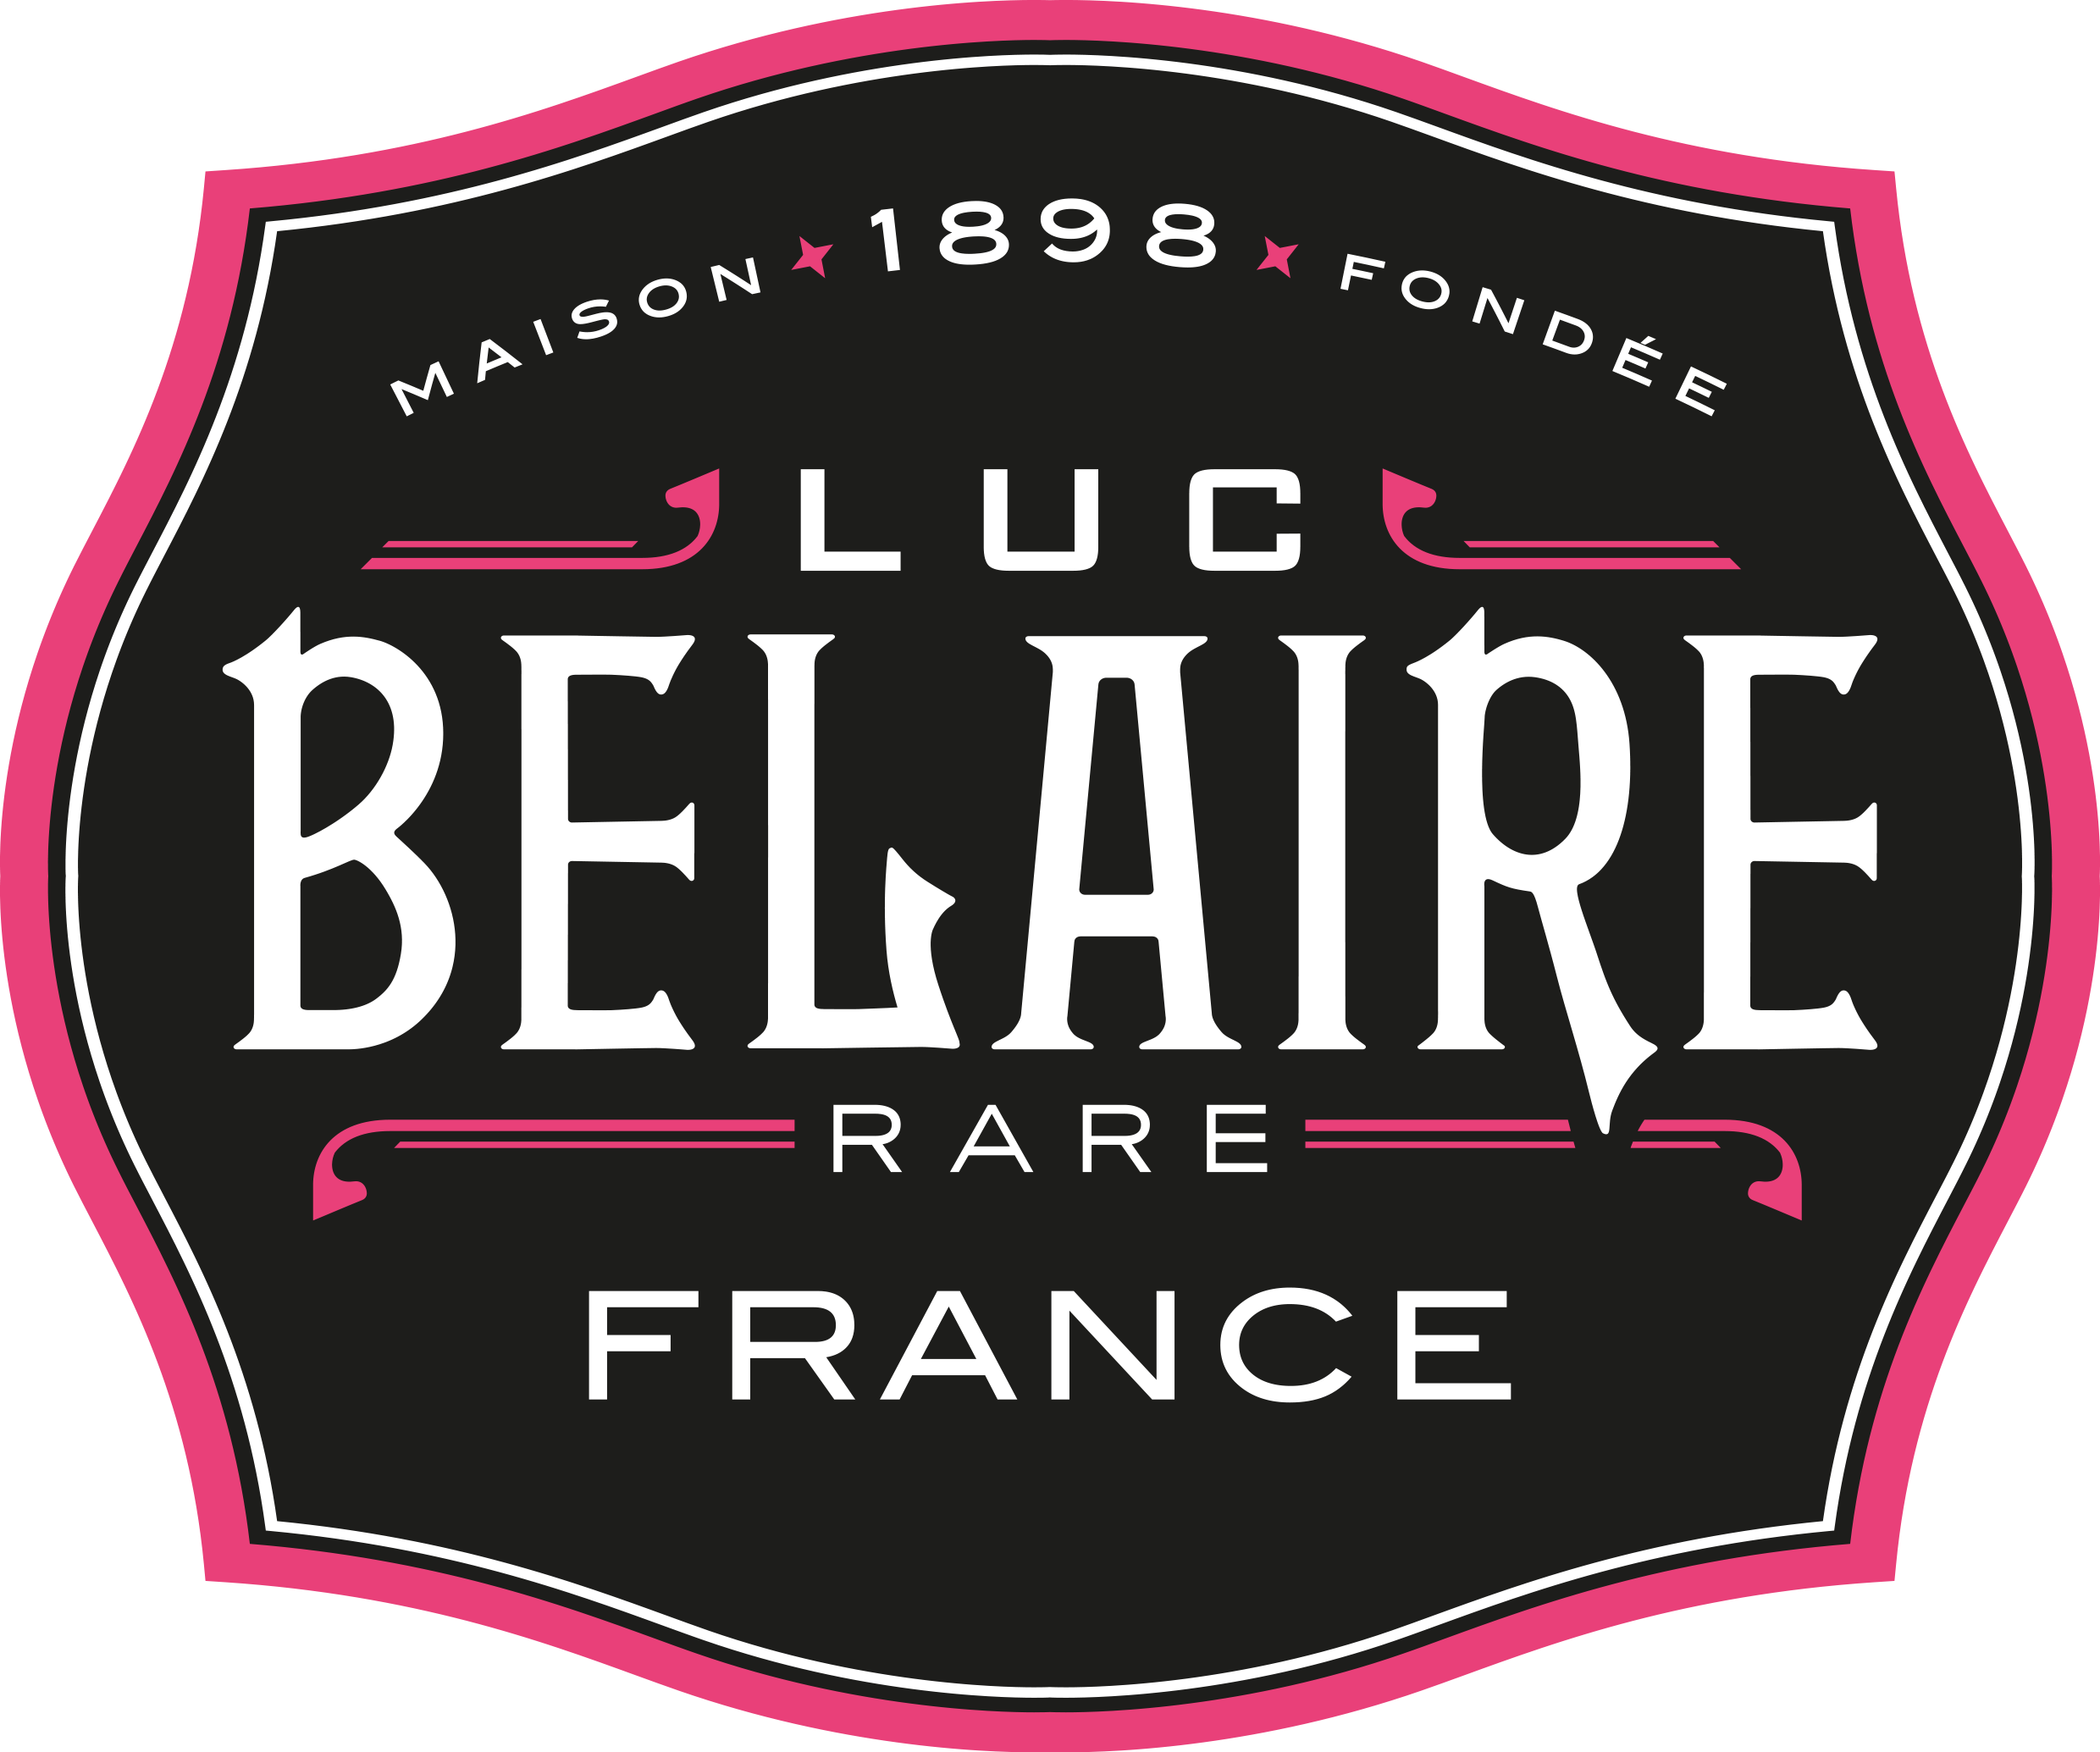 LUC BELAIRE